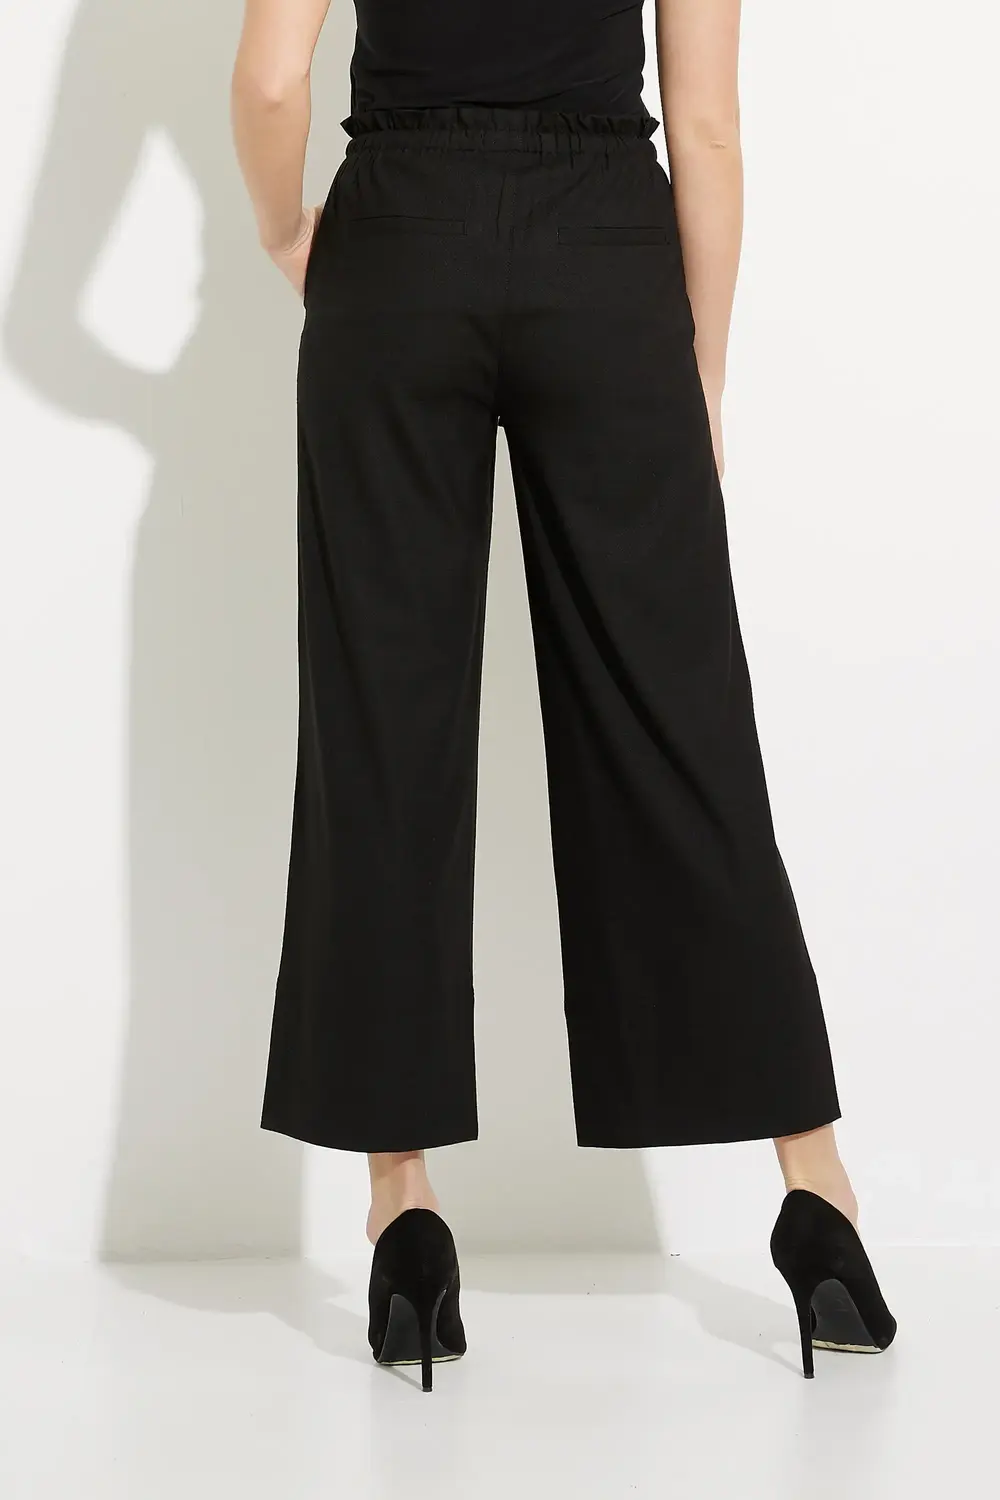 Pull-On Wide Leg Pants Style LM4463TS29. Black. 2